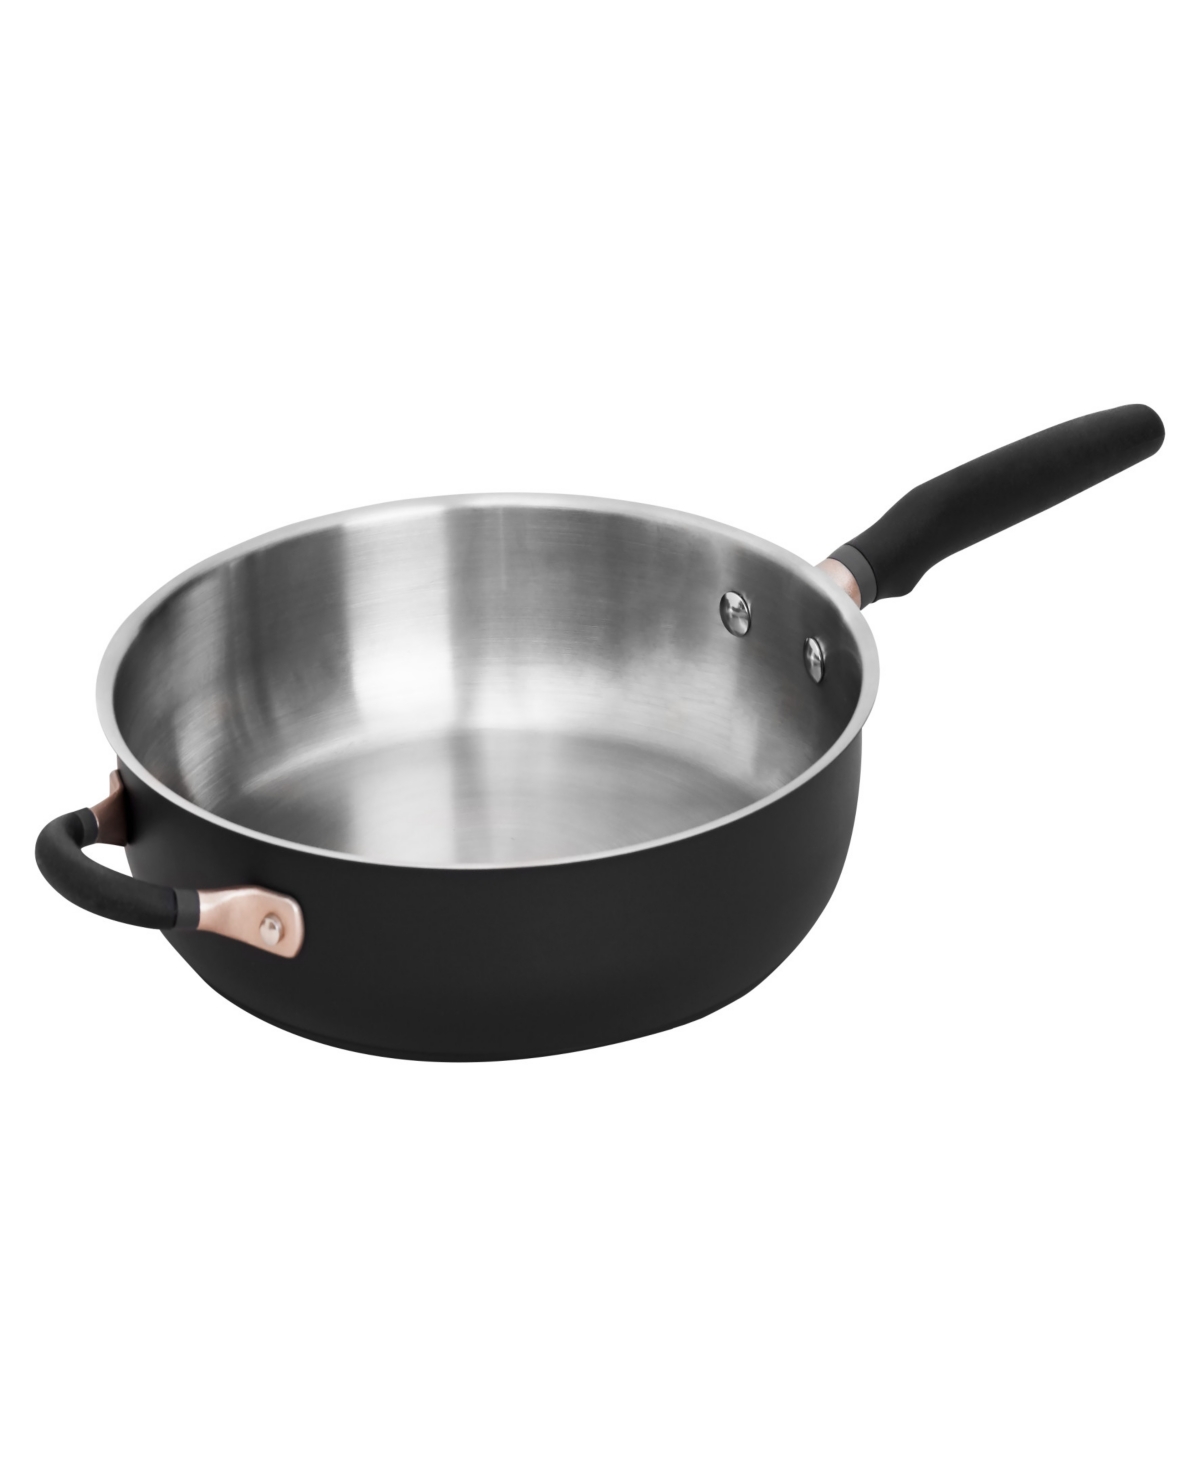 Meyer Accent Series Stainless Steel 4.5-quart Saute Pan In Matte Black With Gold Accent